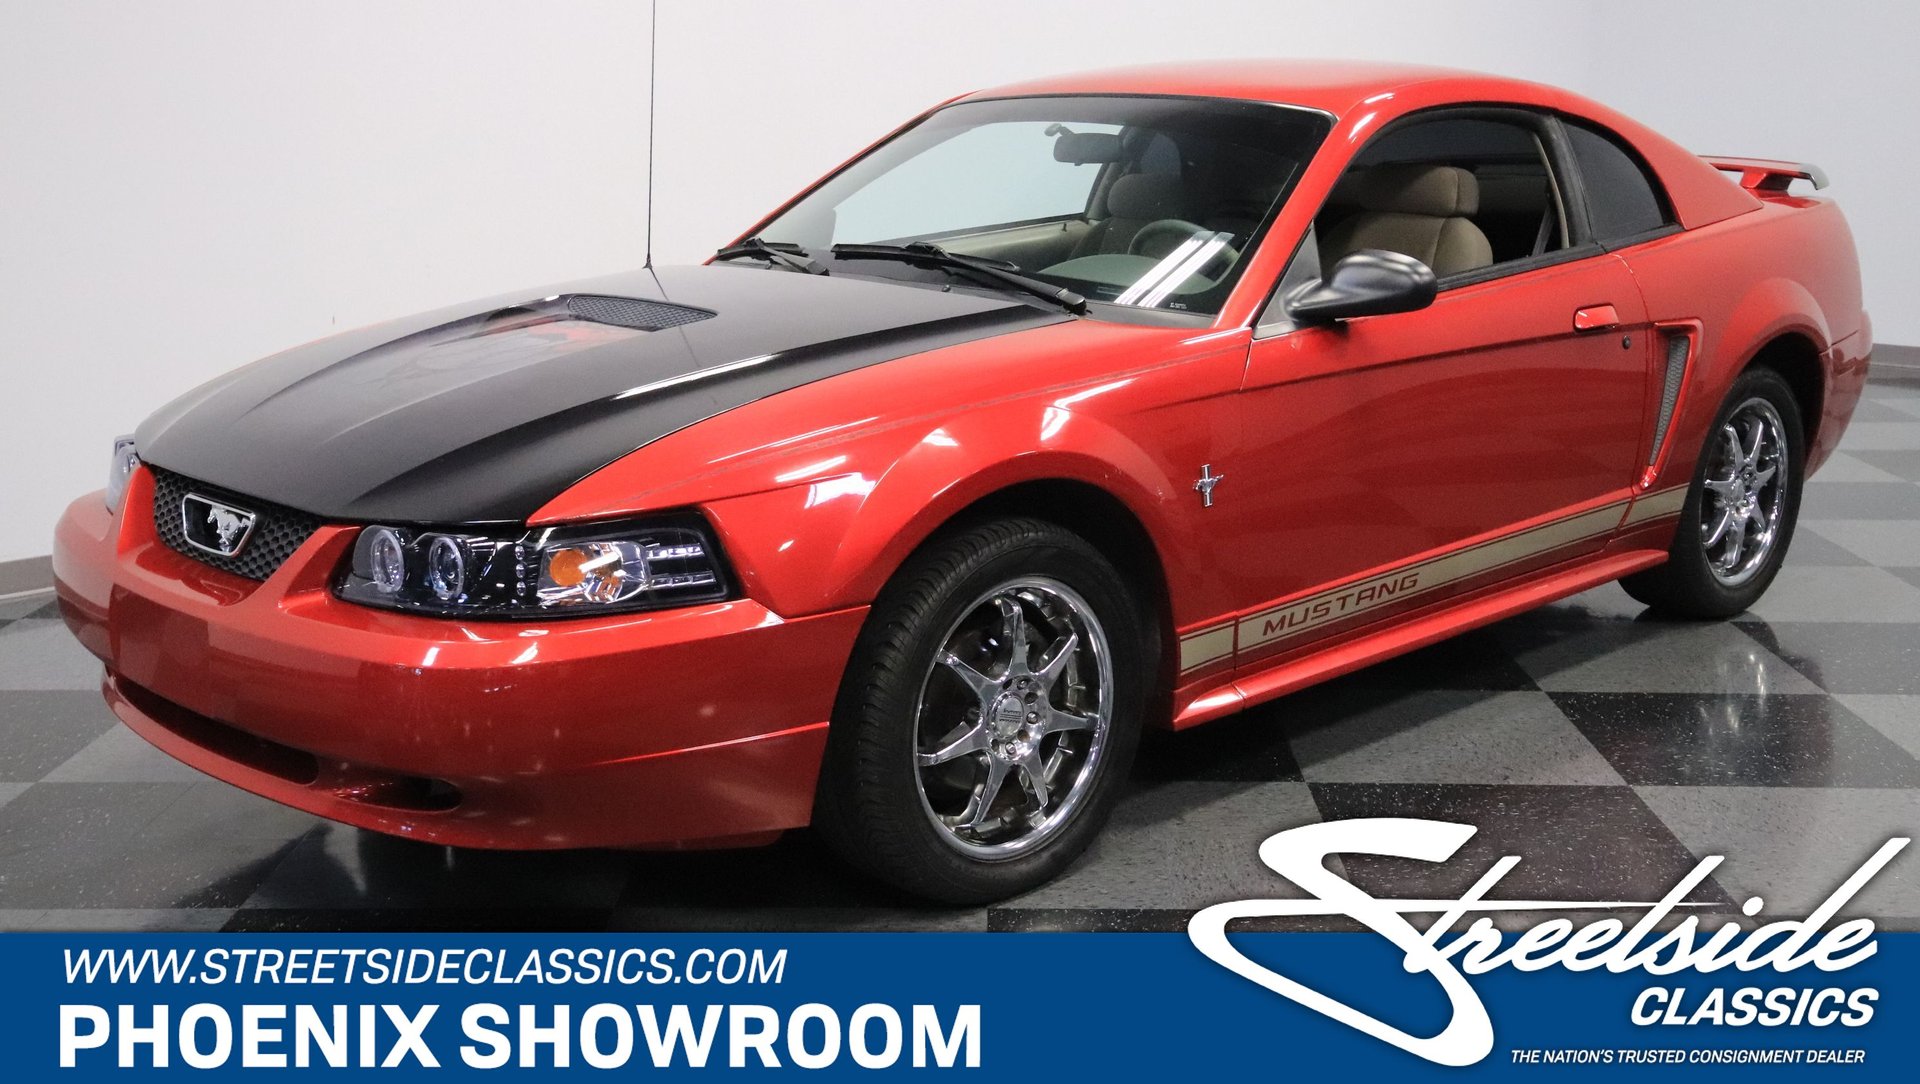 2002 Ford Mustang | Classic Cars for Sale - Streetside Classics